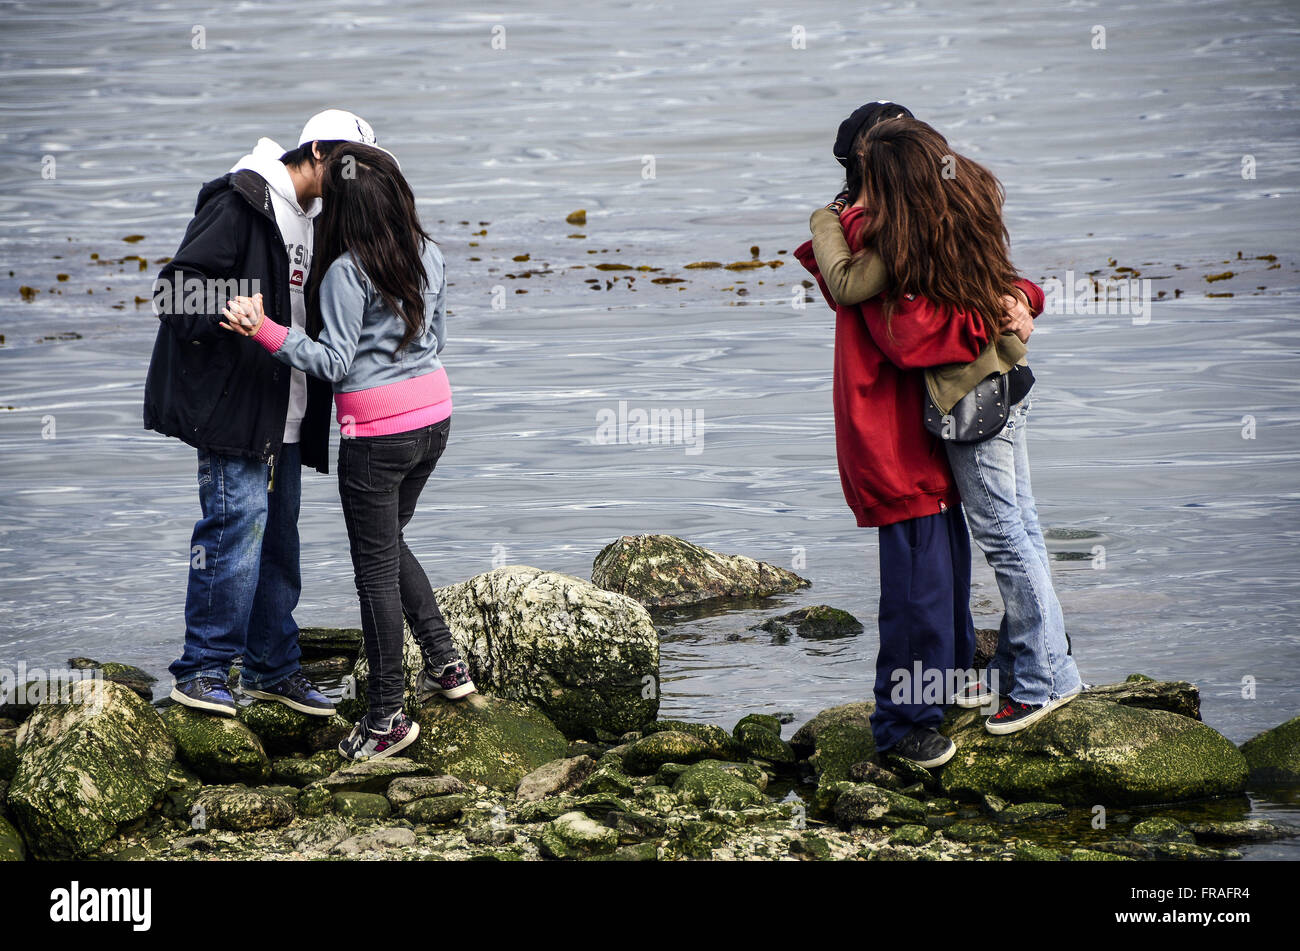 Couples embraced and teenagers kissing near the port city Stock Photo